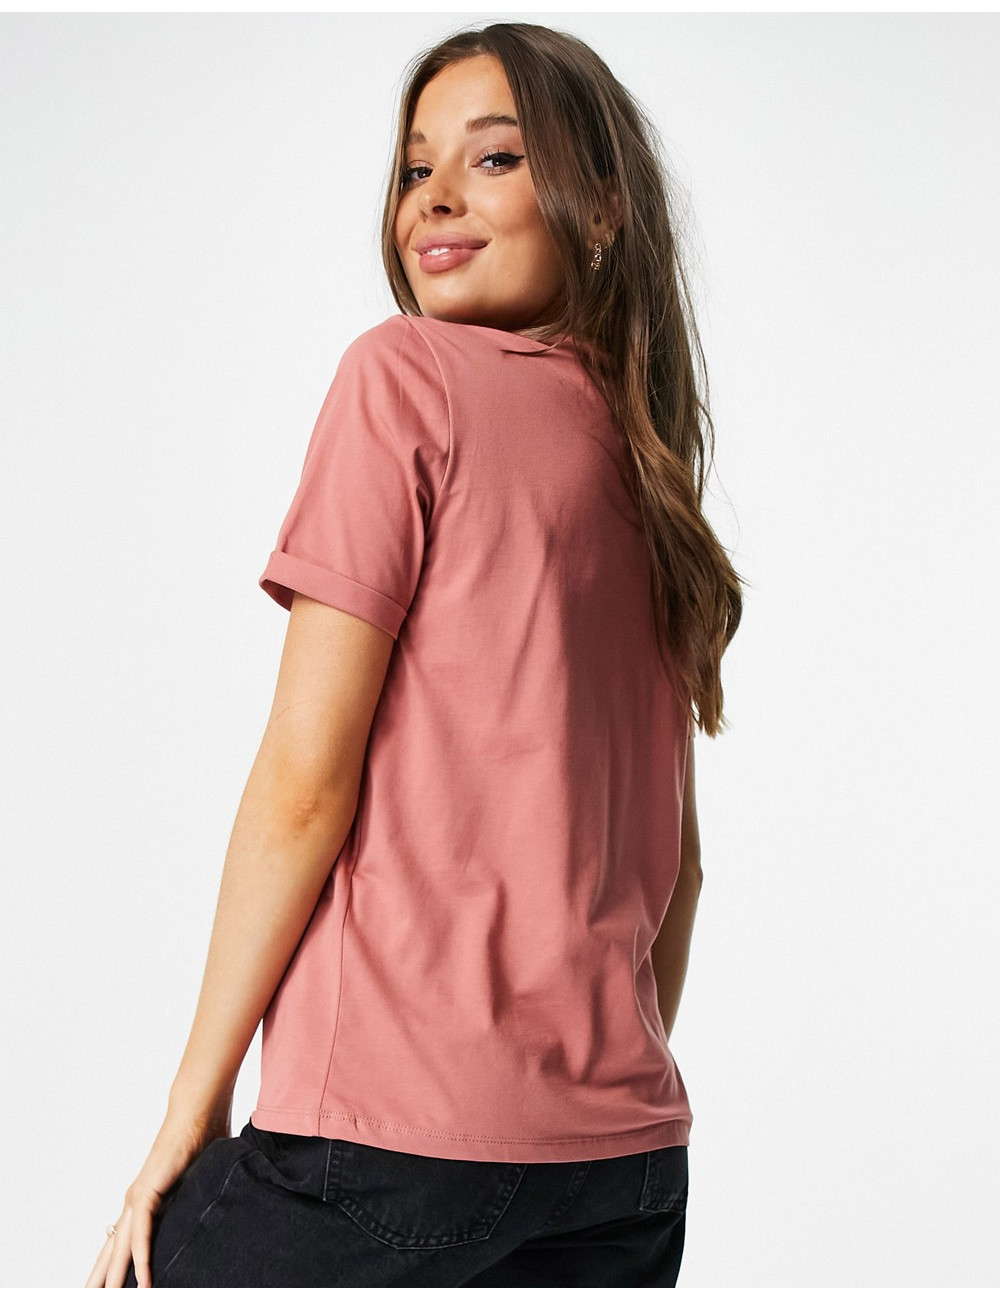 Pieces cotton t-shirt in rose